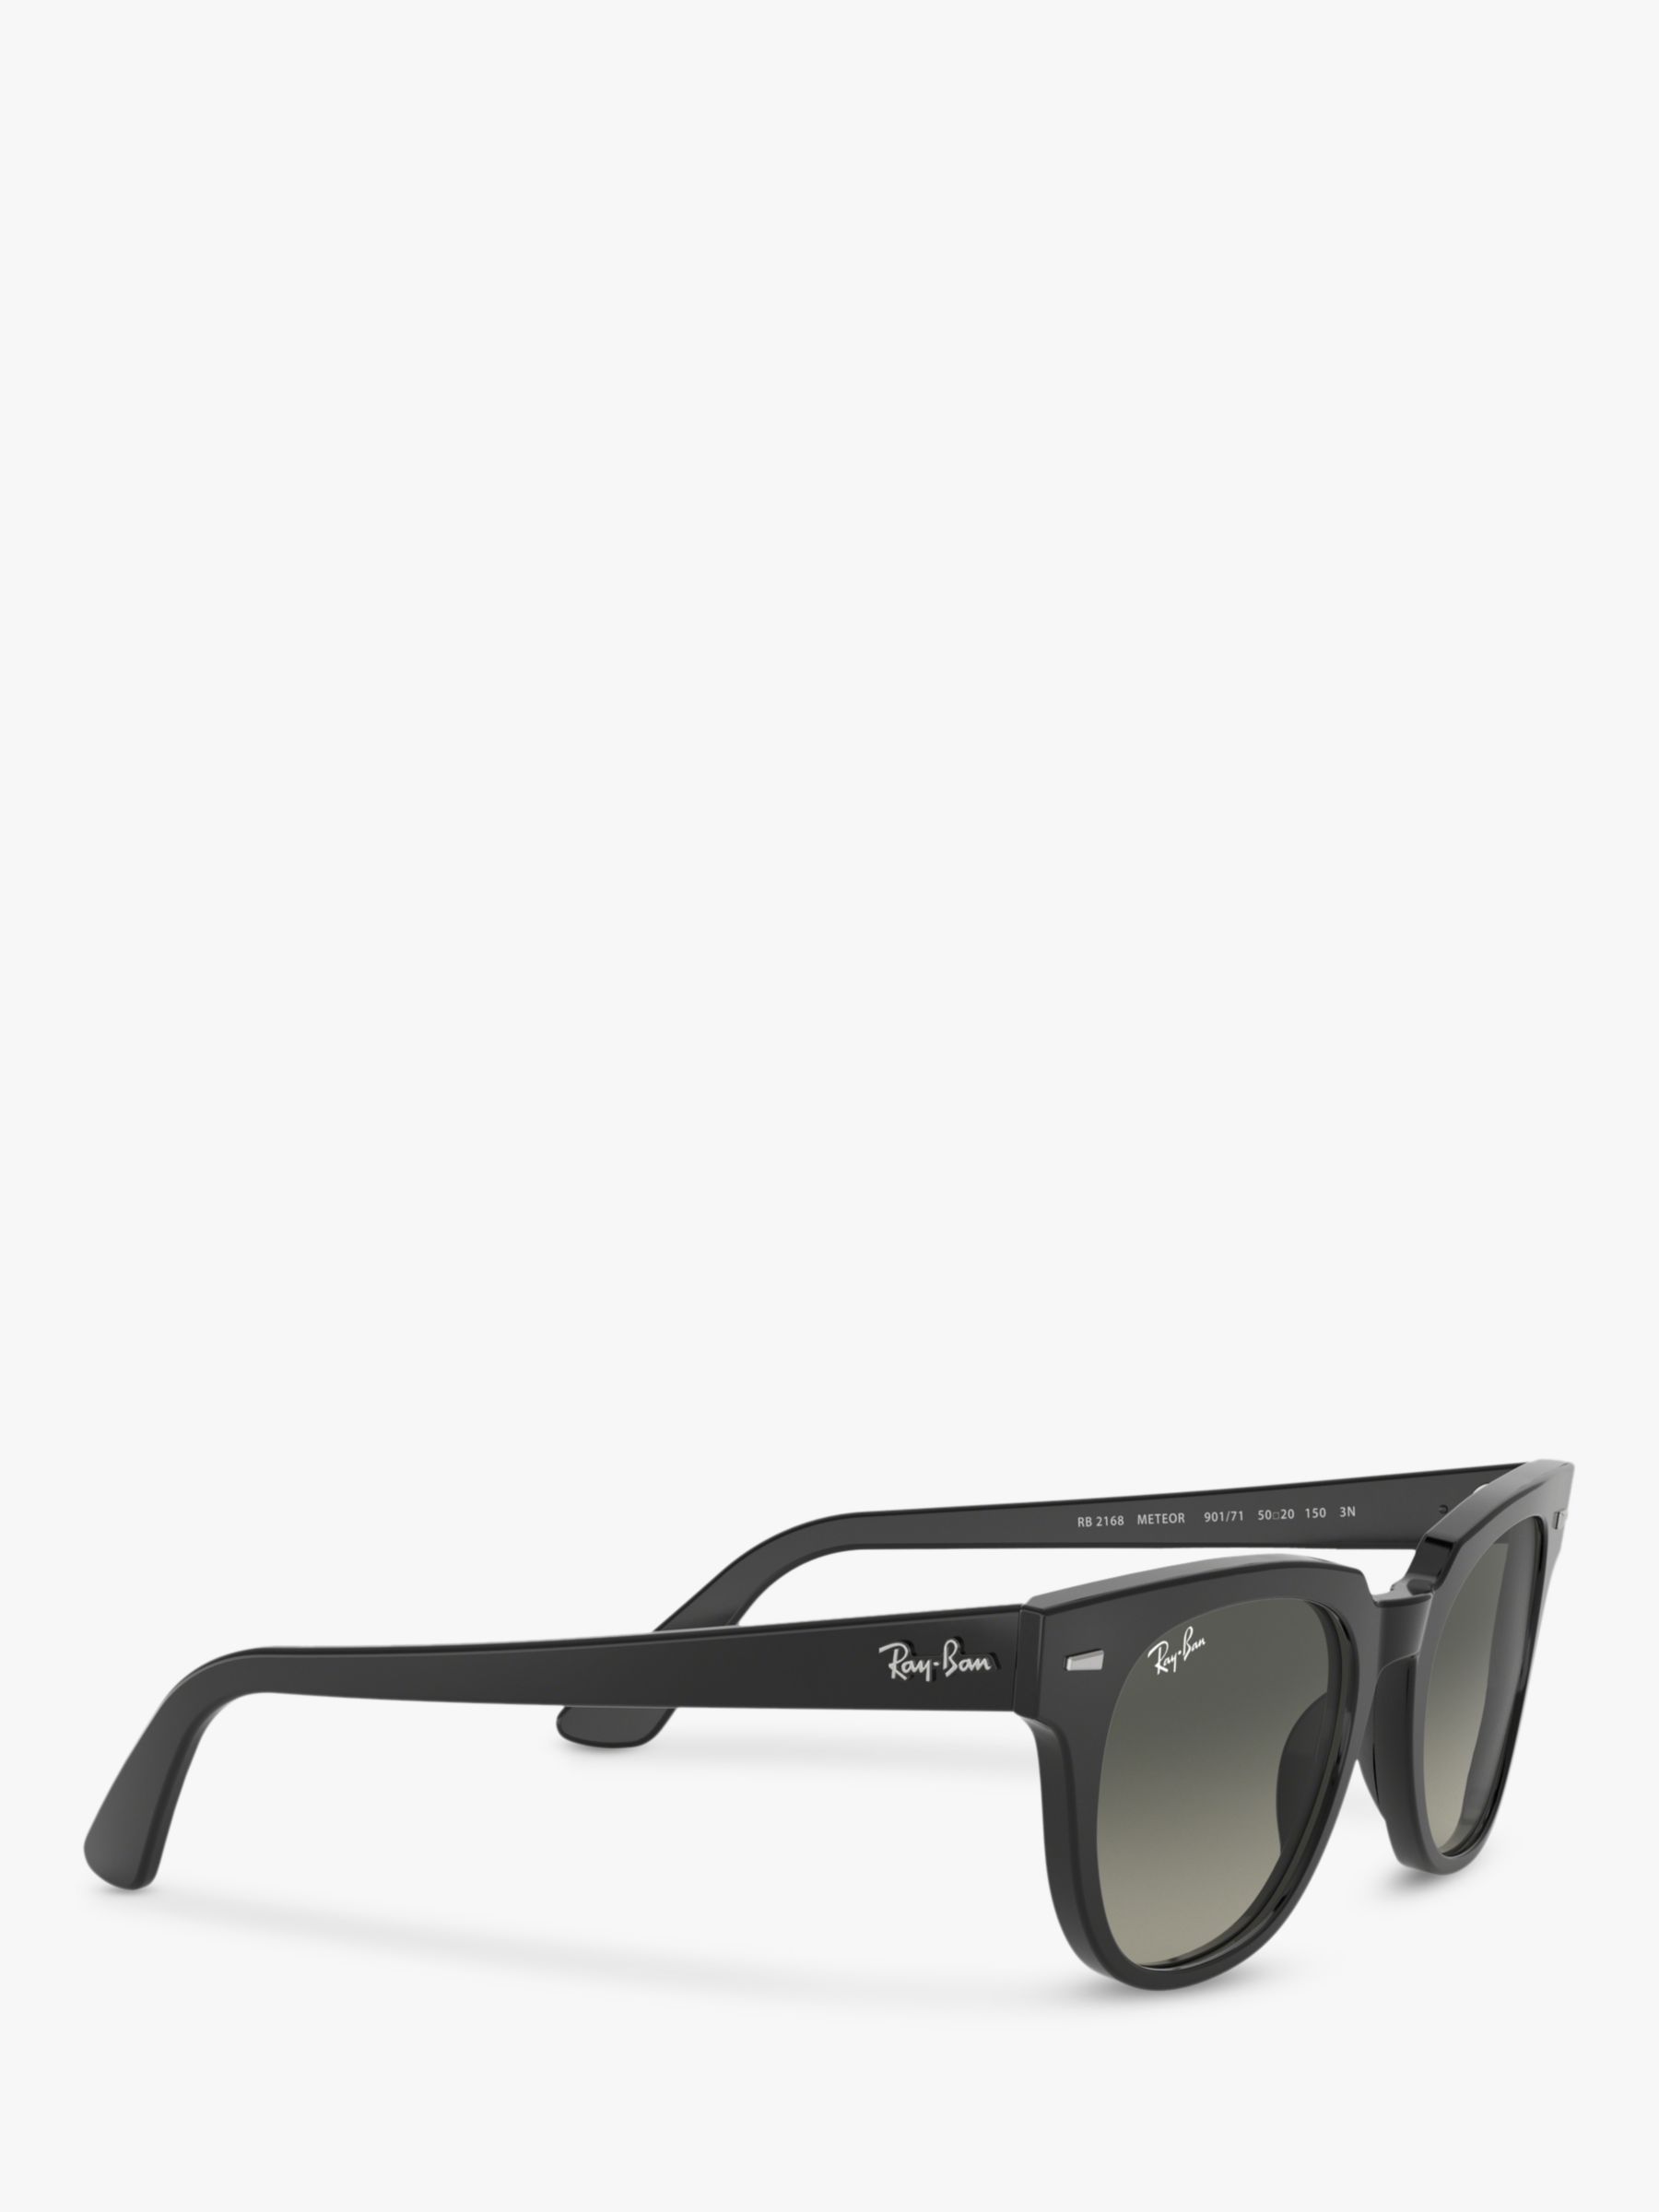 Ray Ban Rb2168 Unisex Square Sunglasses Blackgrey Gradient At John Lewis And Partners 0639